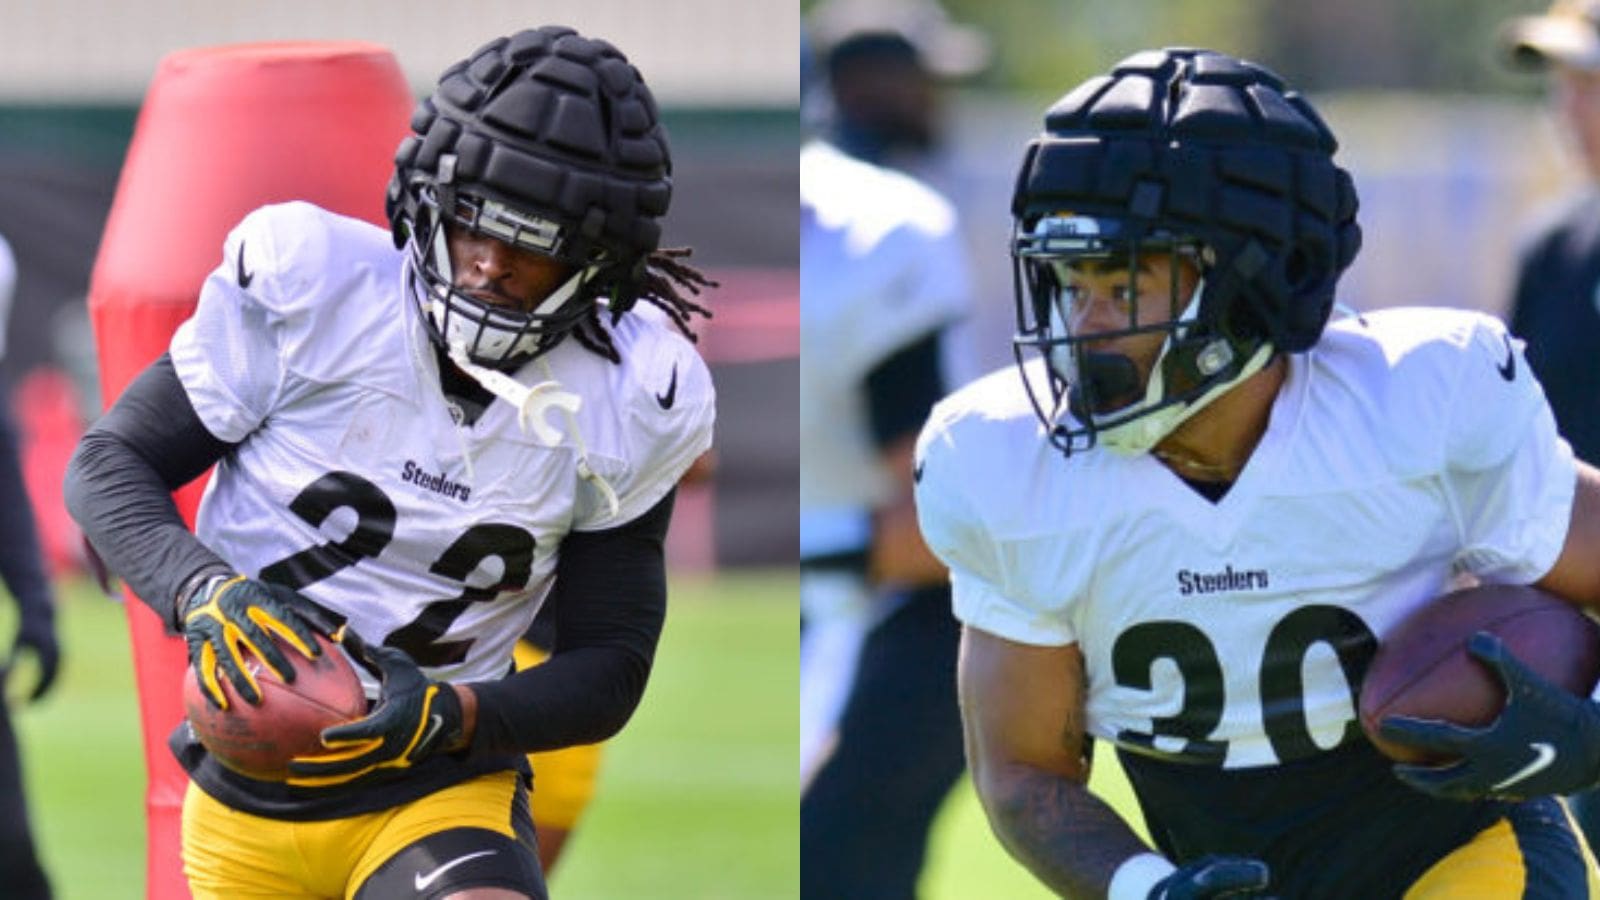 Fantasy Football: What to Do with Steelers RBs Harris, Warren?